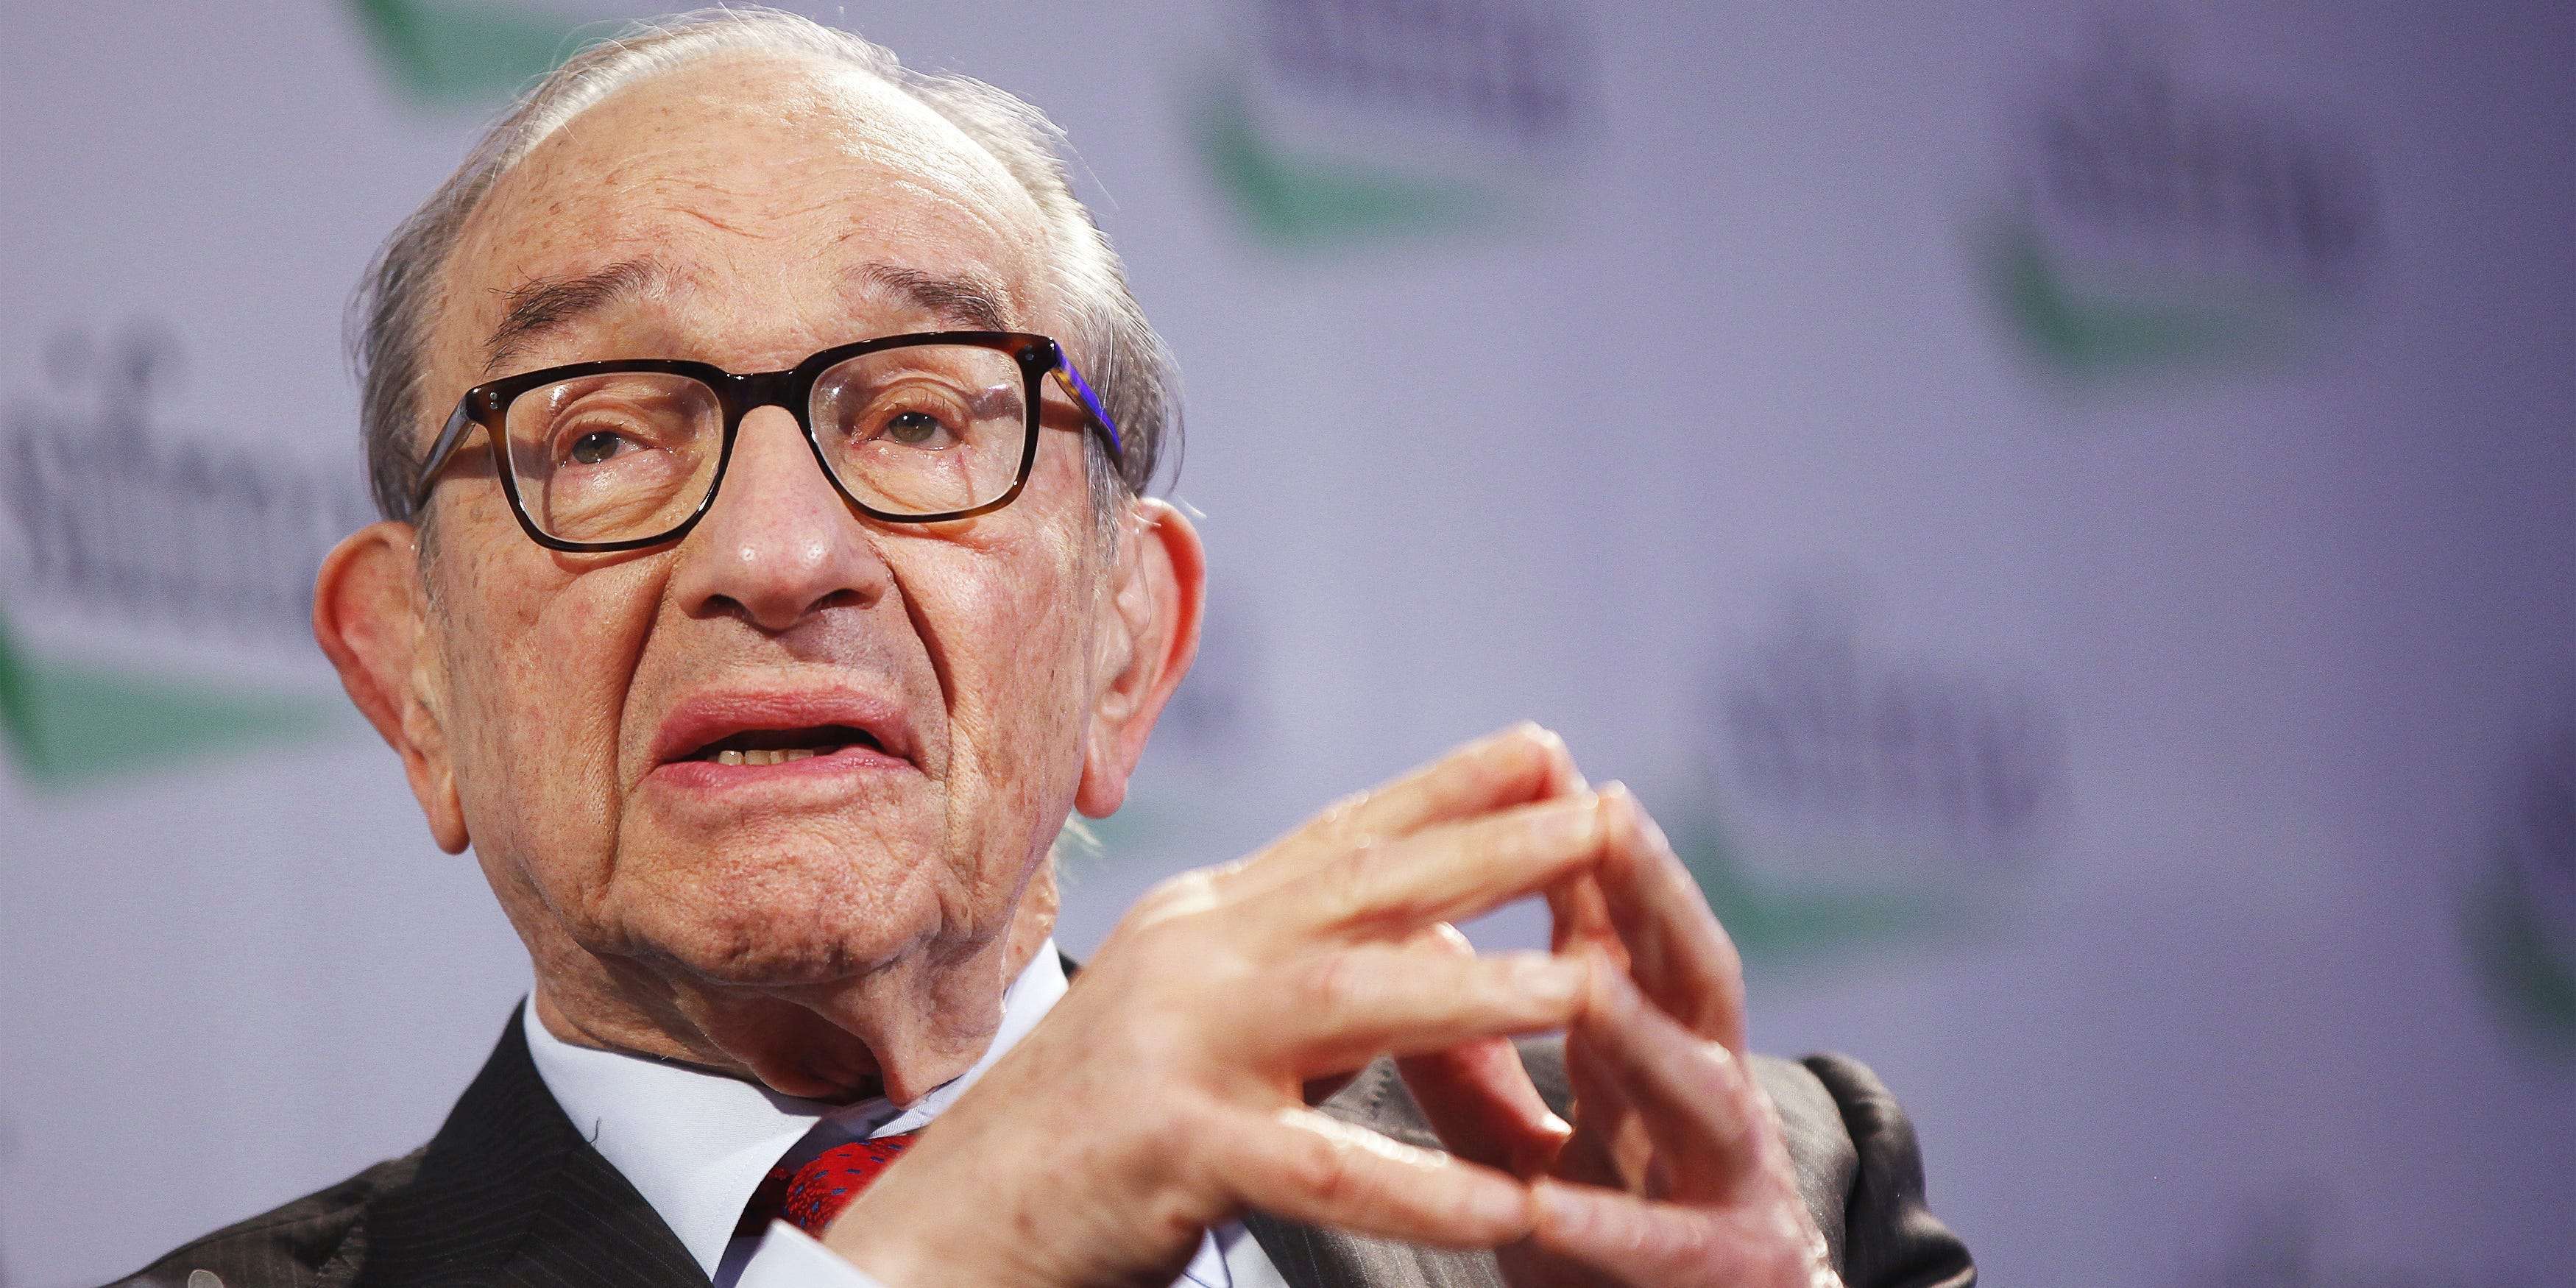 Former Fed Chair Alan Greenspan says inflation is 'major concern' as